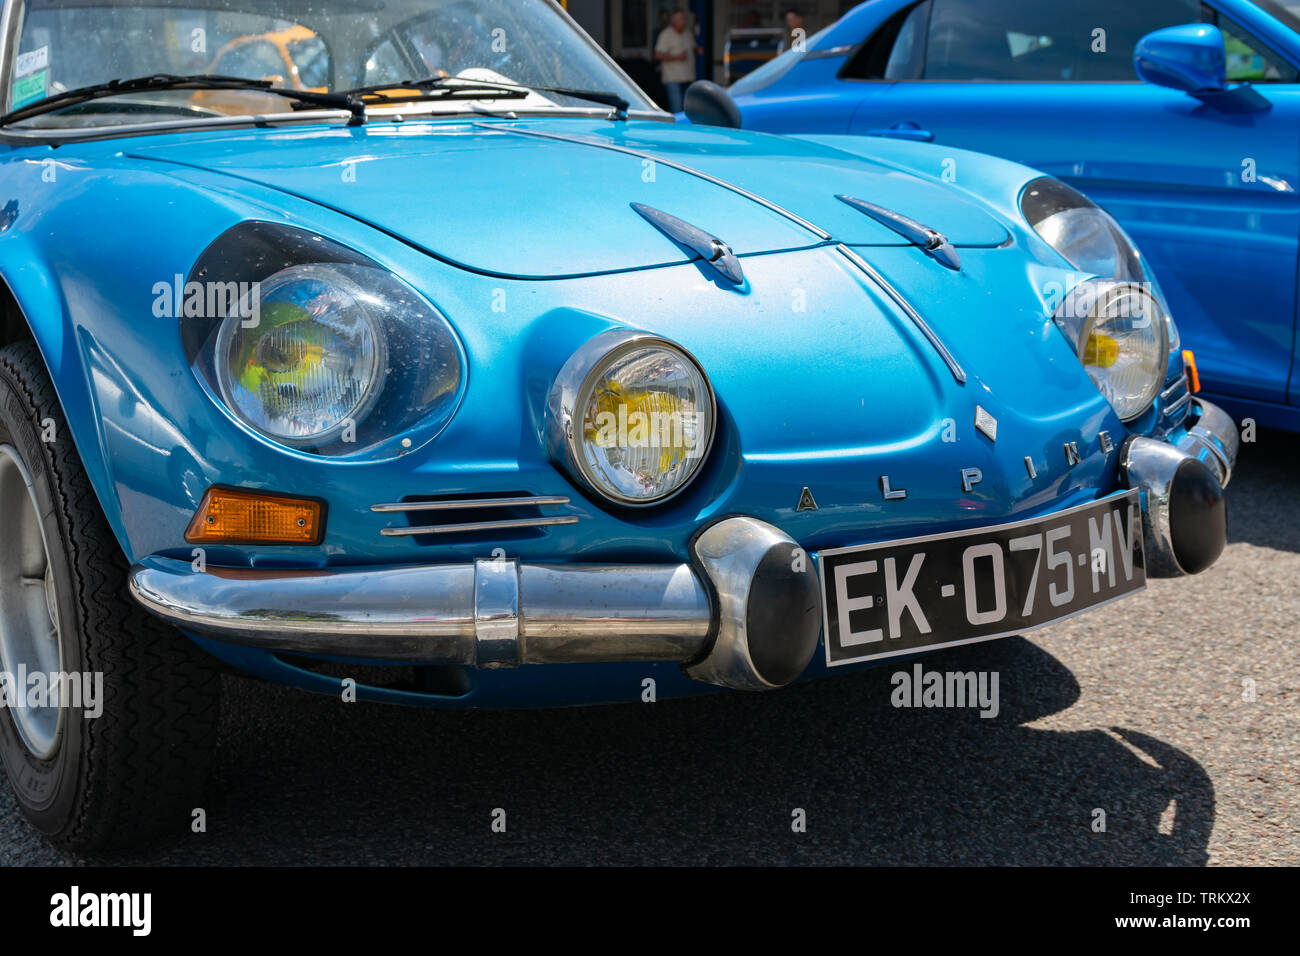 Wattrelos,FRANCE-June 02,2019: blue old Renault Alpine A110,front view,car exhibited at the 7th Retro Car Festival at the Renault Wattrelos Martinoire. Stock Photo